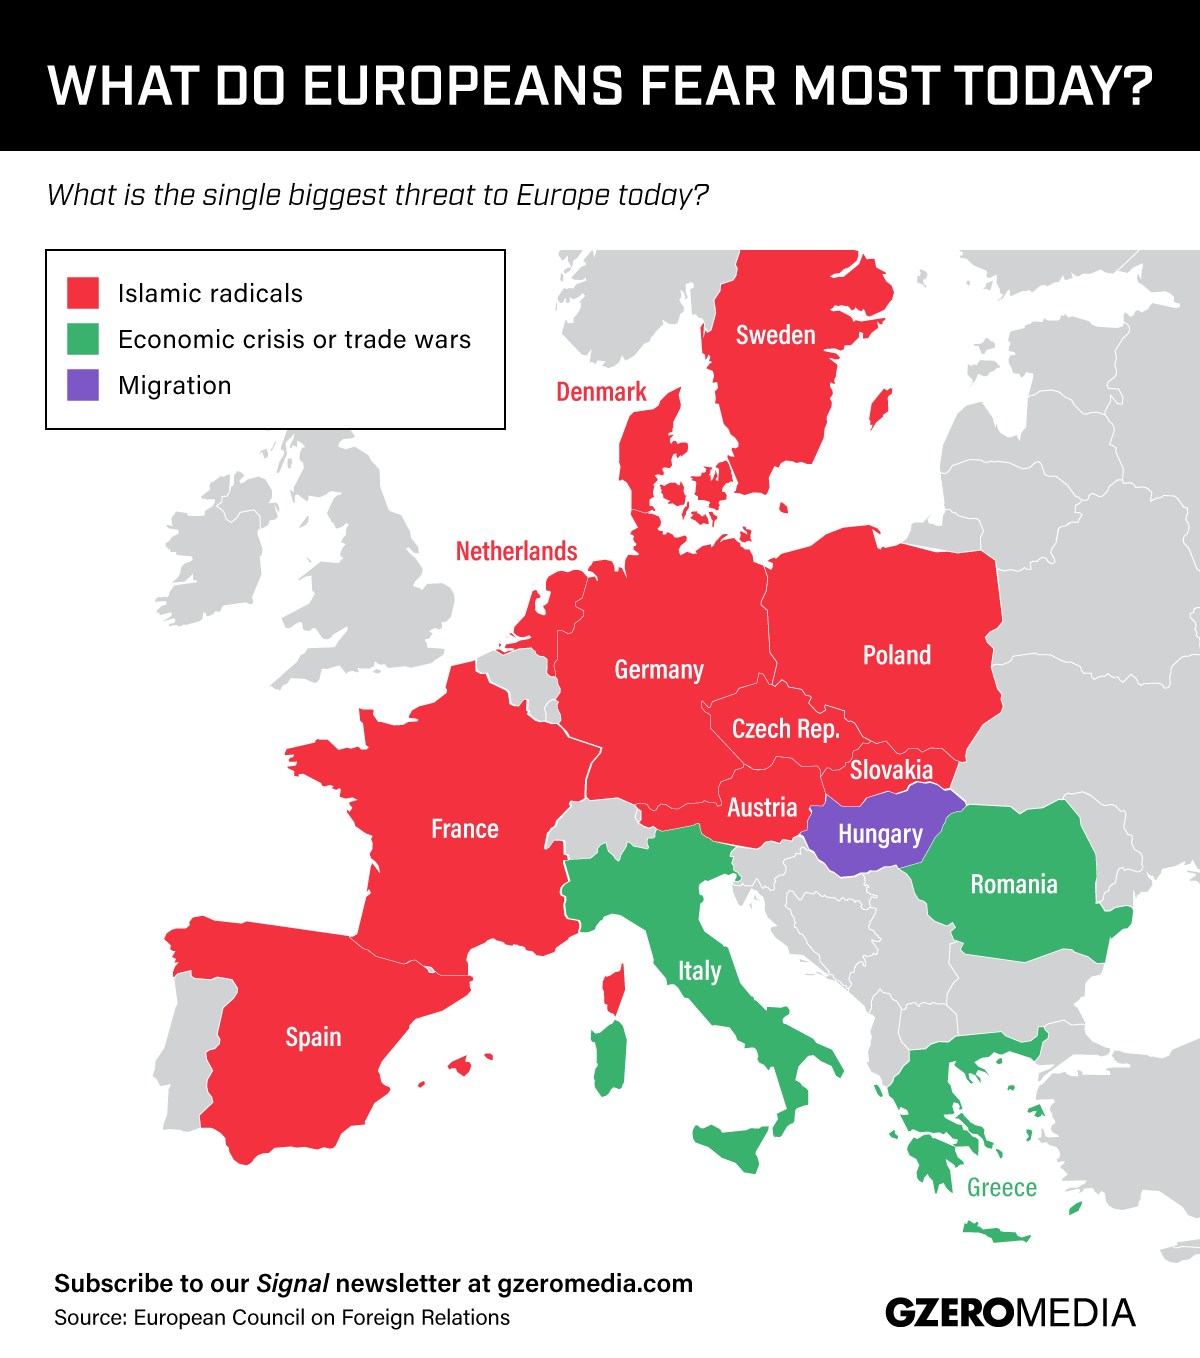 Graphic Truth: Europe’s Fear of Islamic Radicals